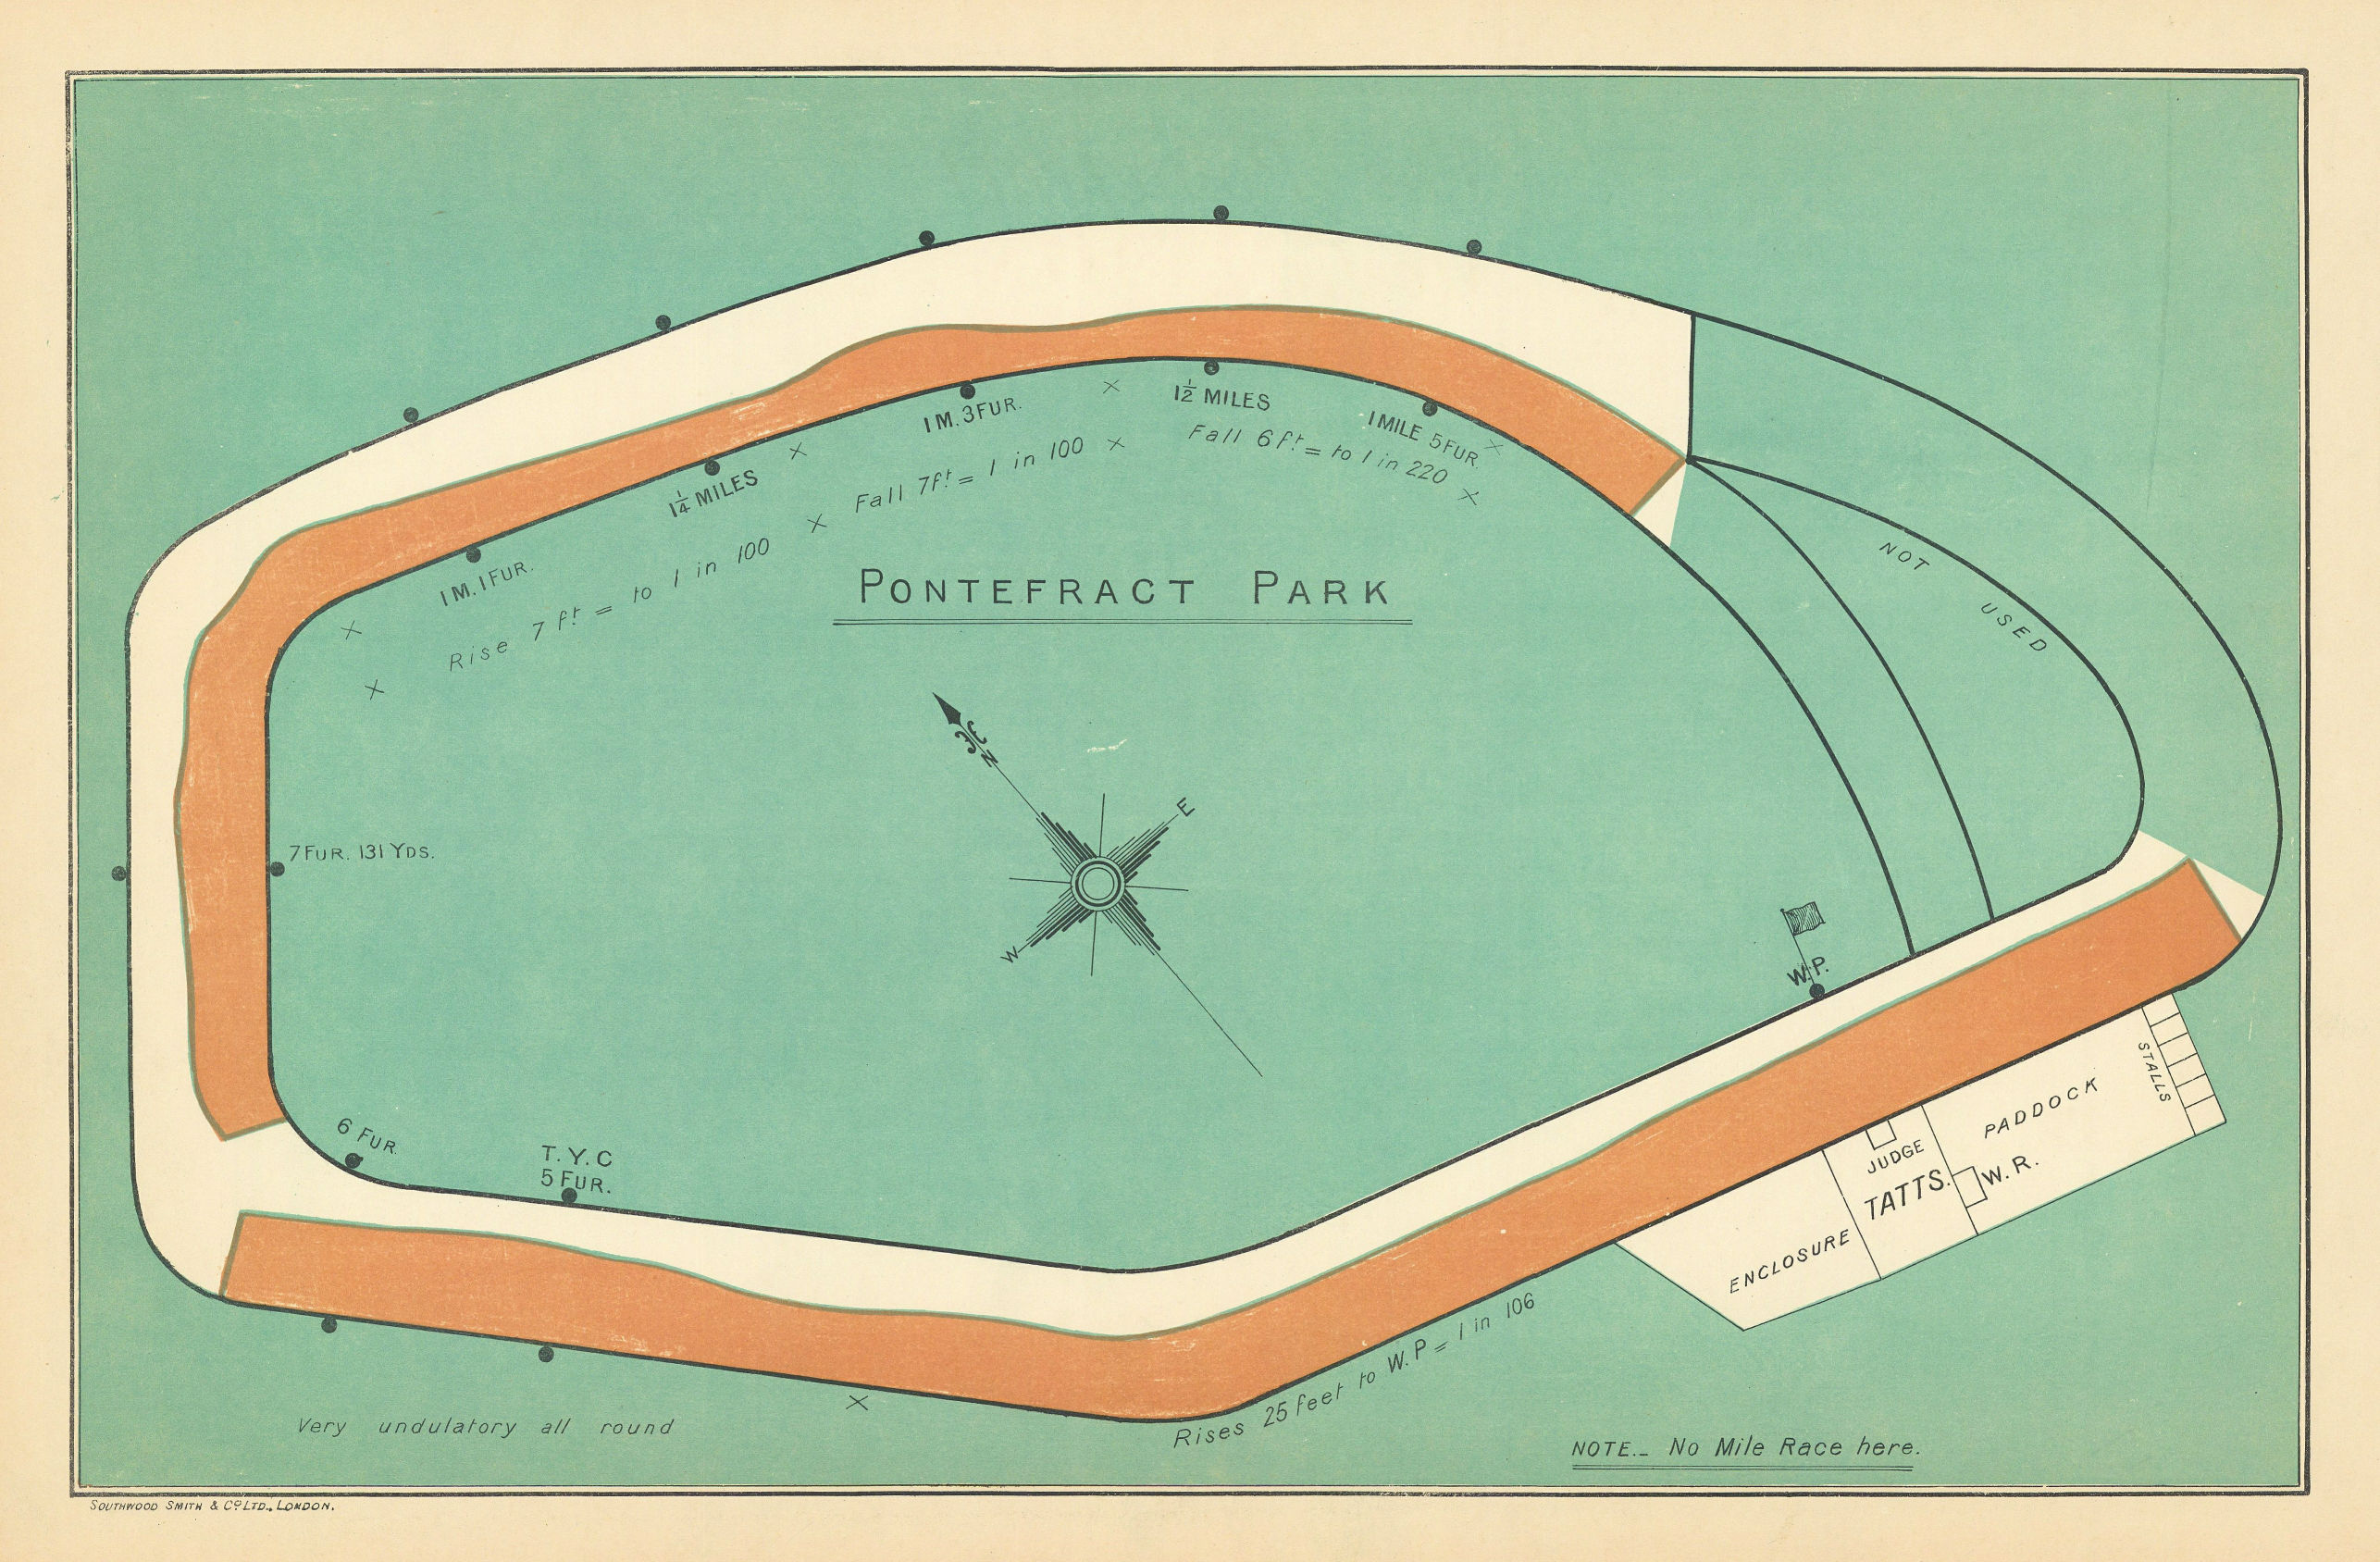 Associate Product Pontefract Park racecourse, Yorkshire. BAYLES 1903 old antique map plan chart